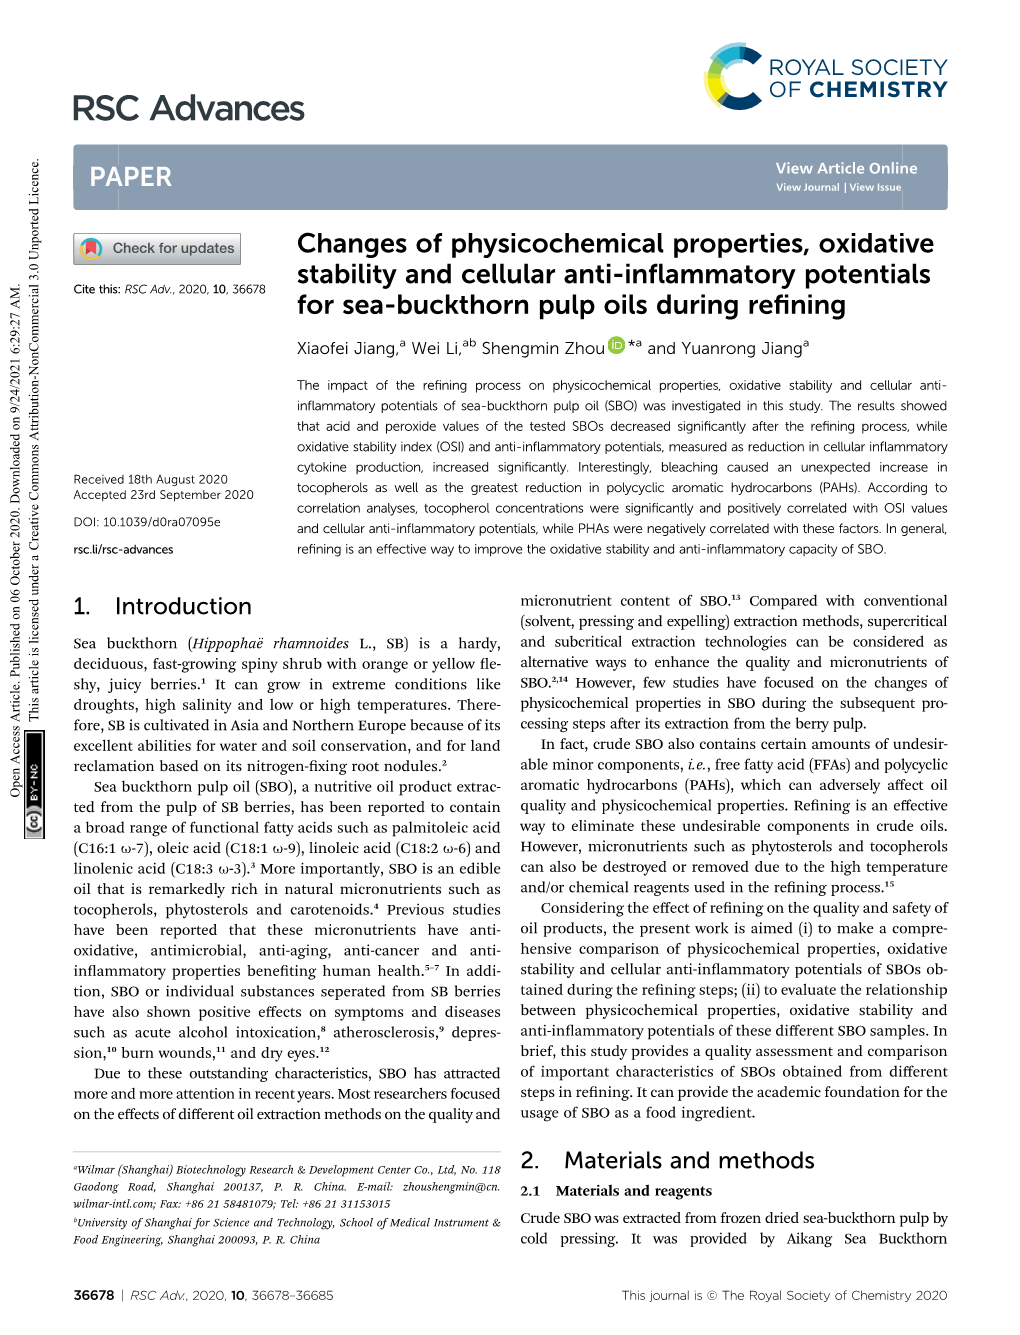 Changes of Physicochemical Properties, Oxidative Stability And